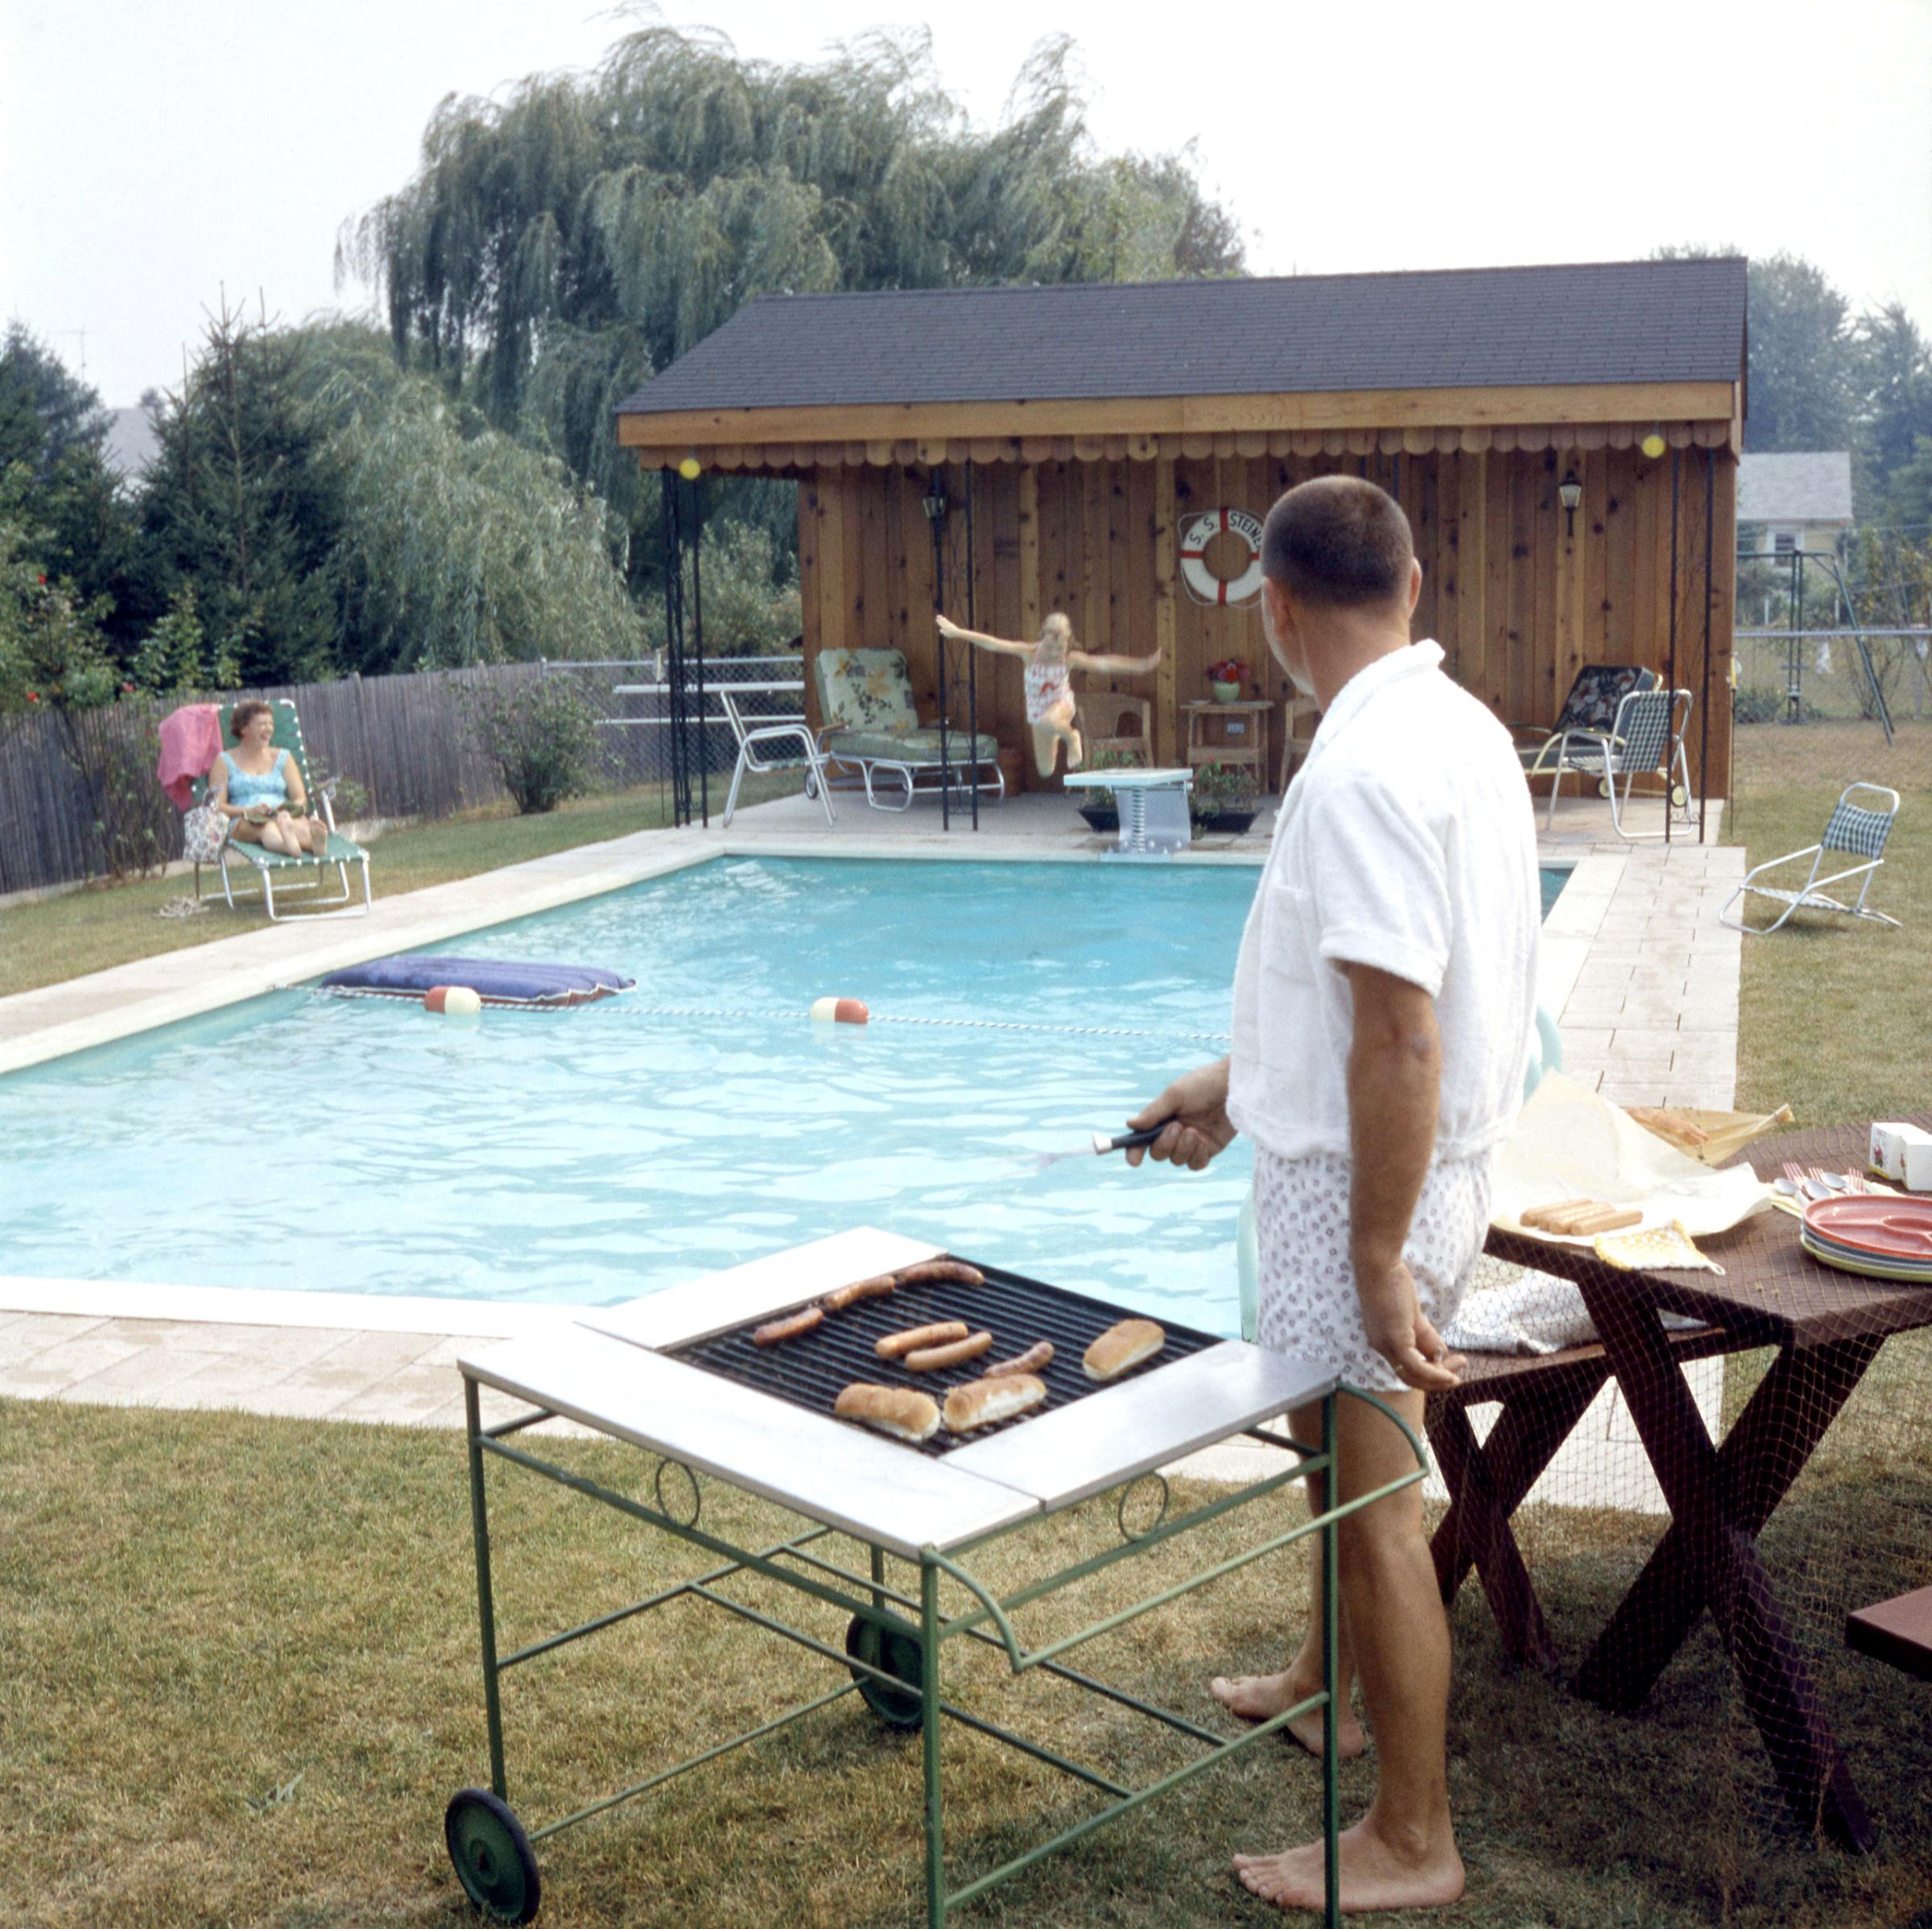 Color photographs of backyard pools in 1960.